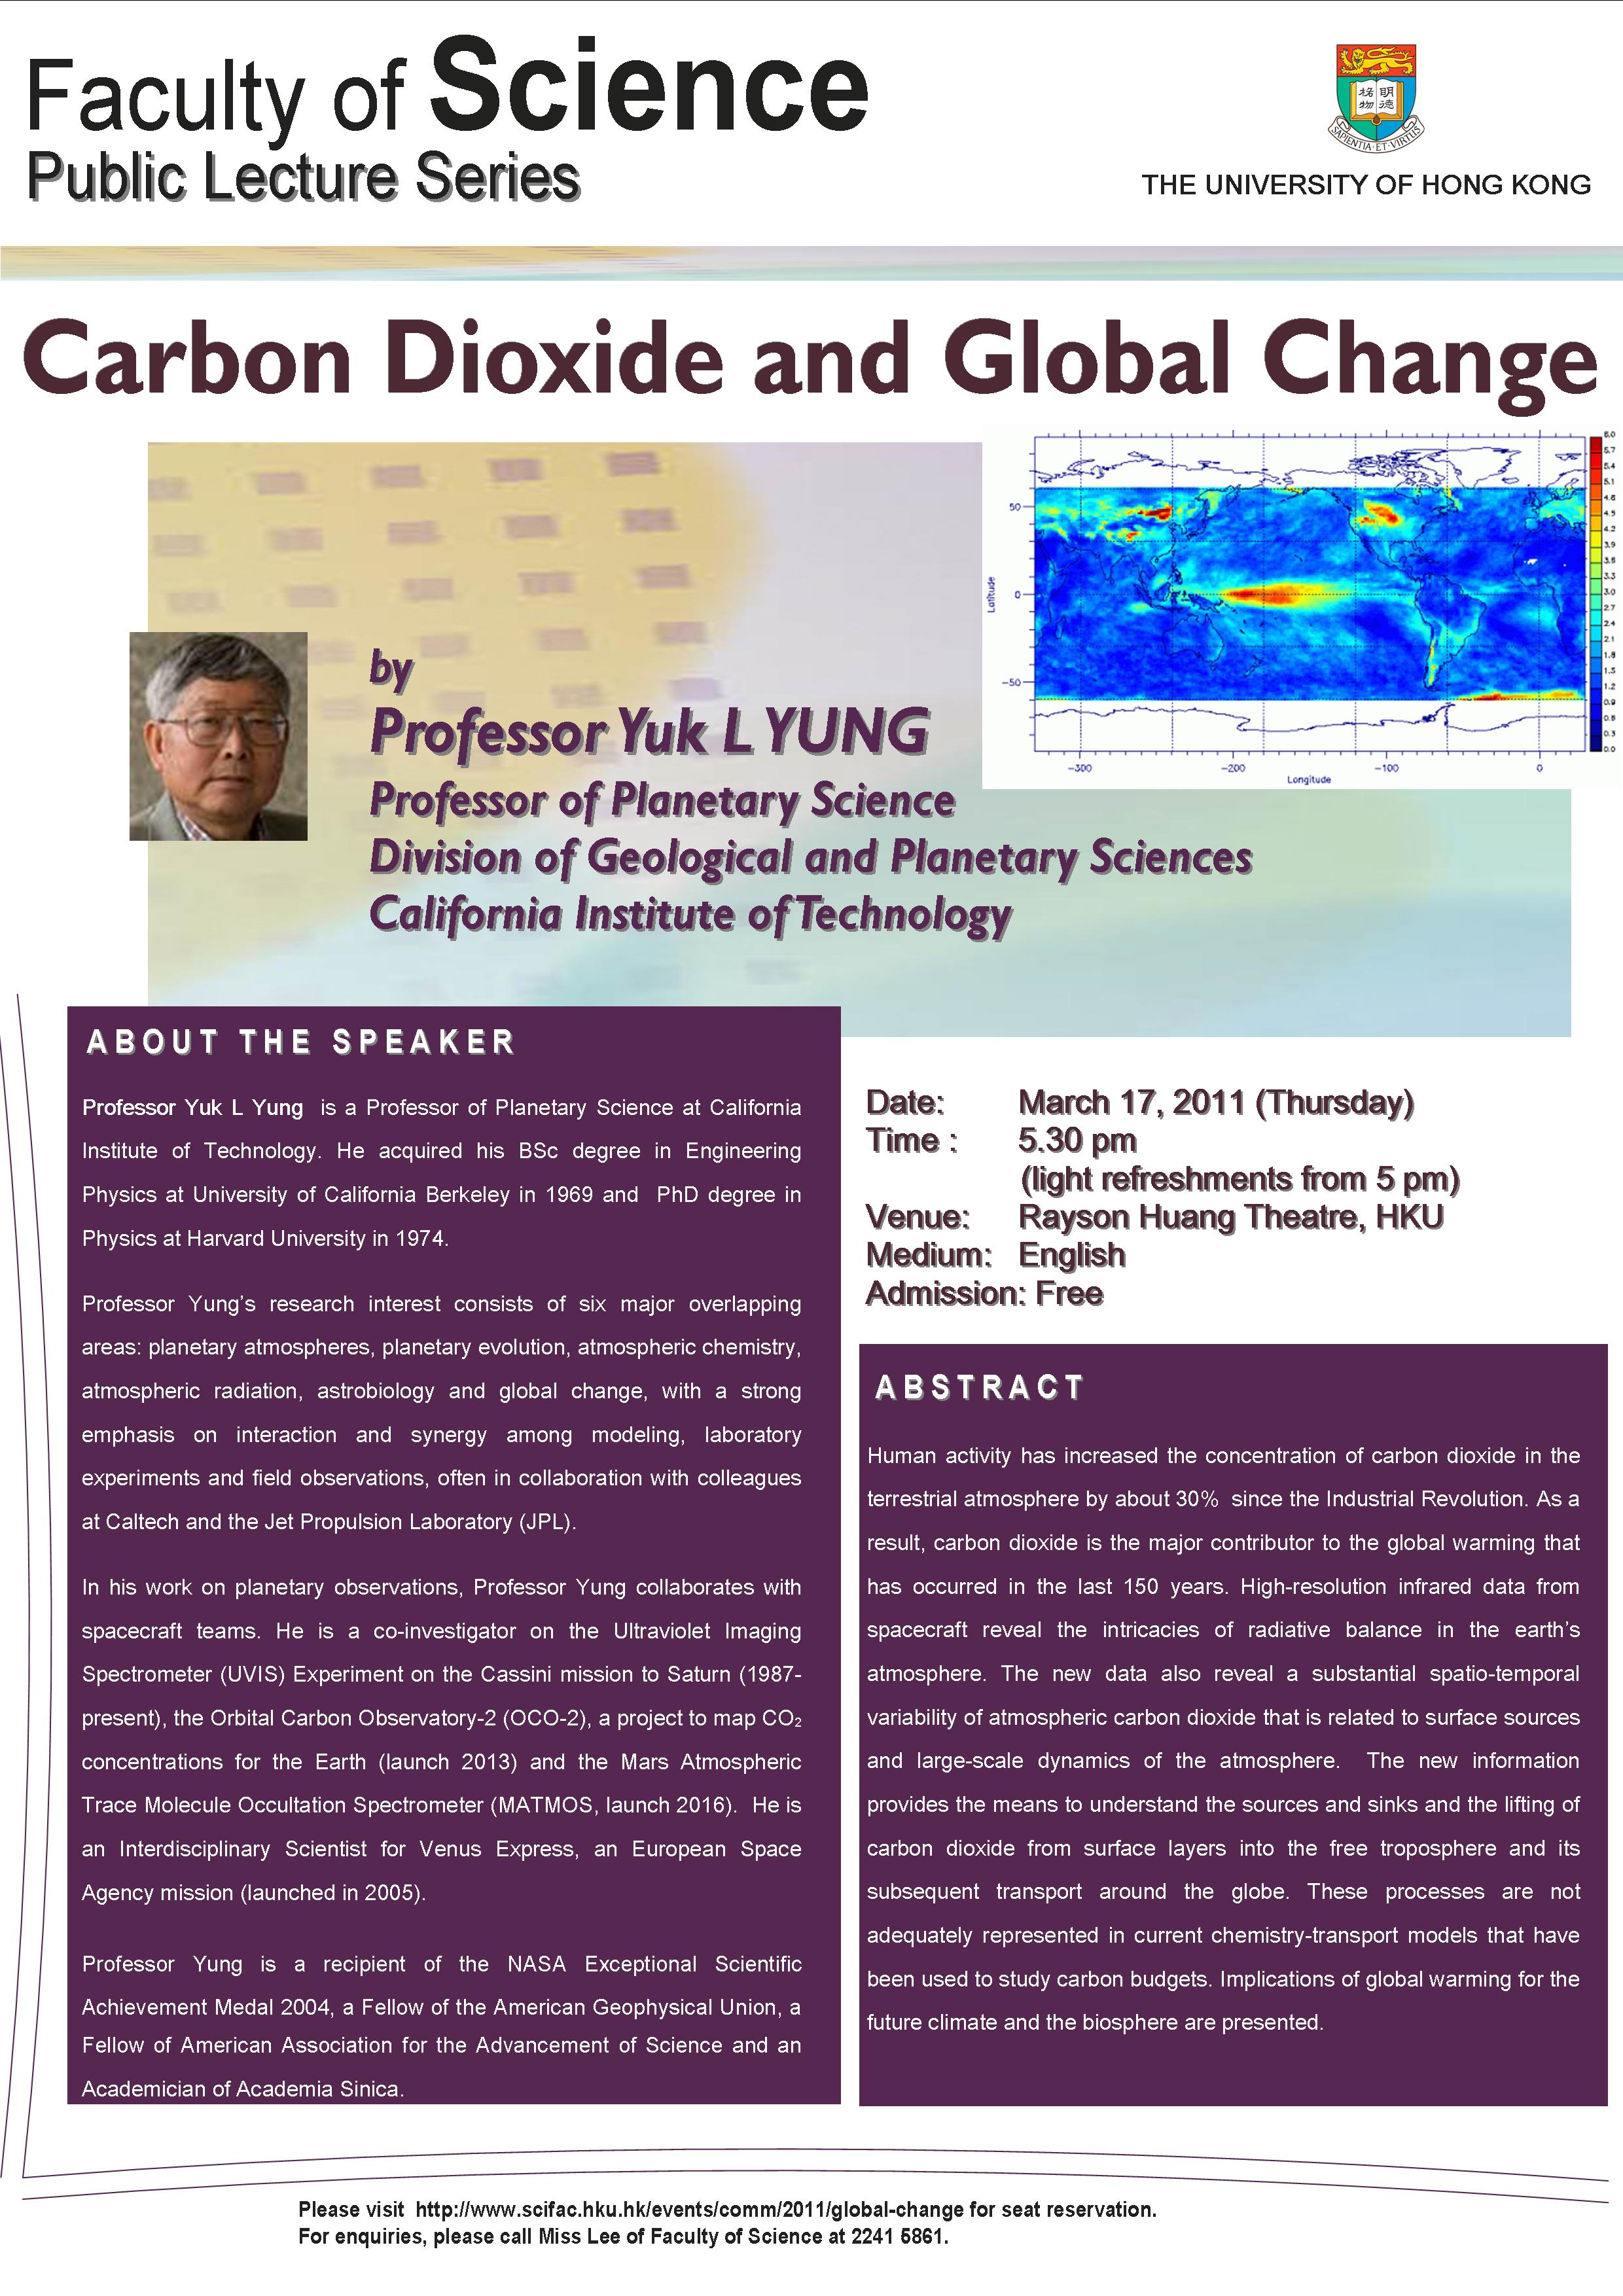 Public lecture: Carbon Dioxide and Global Change